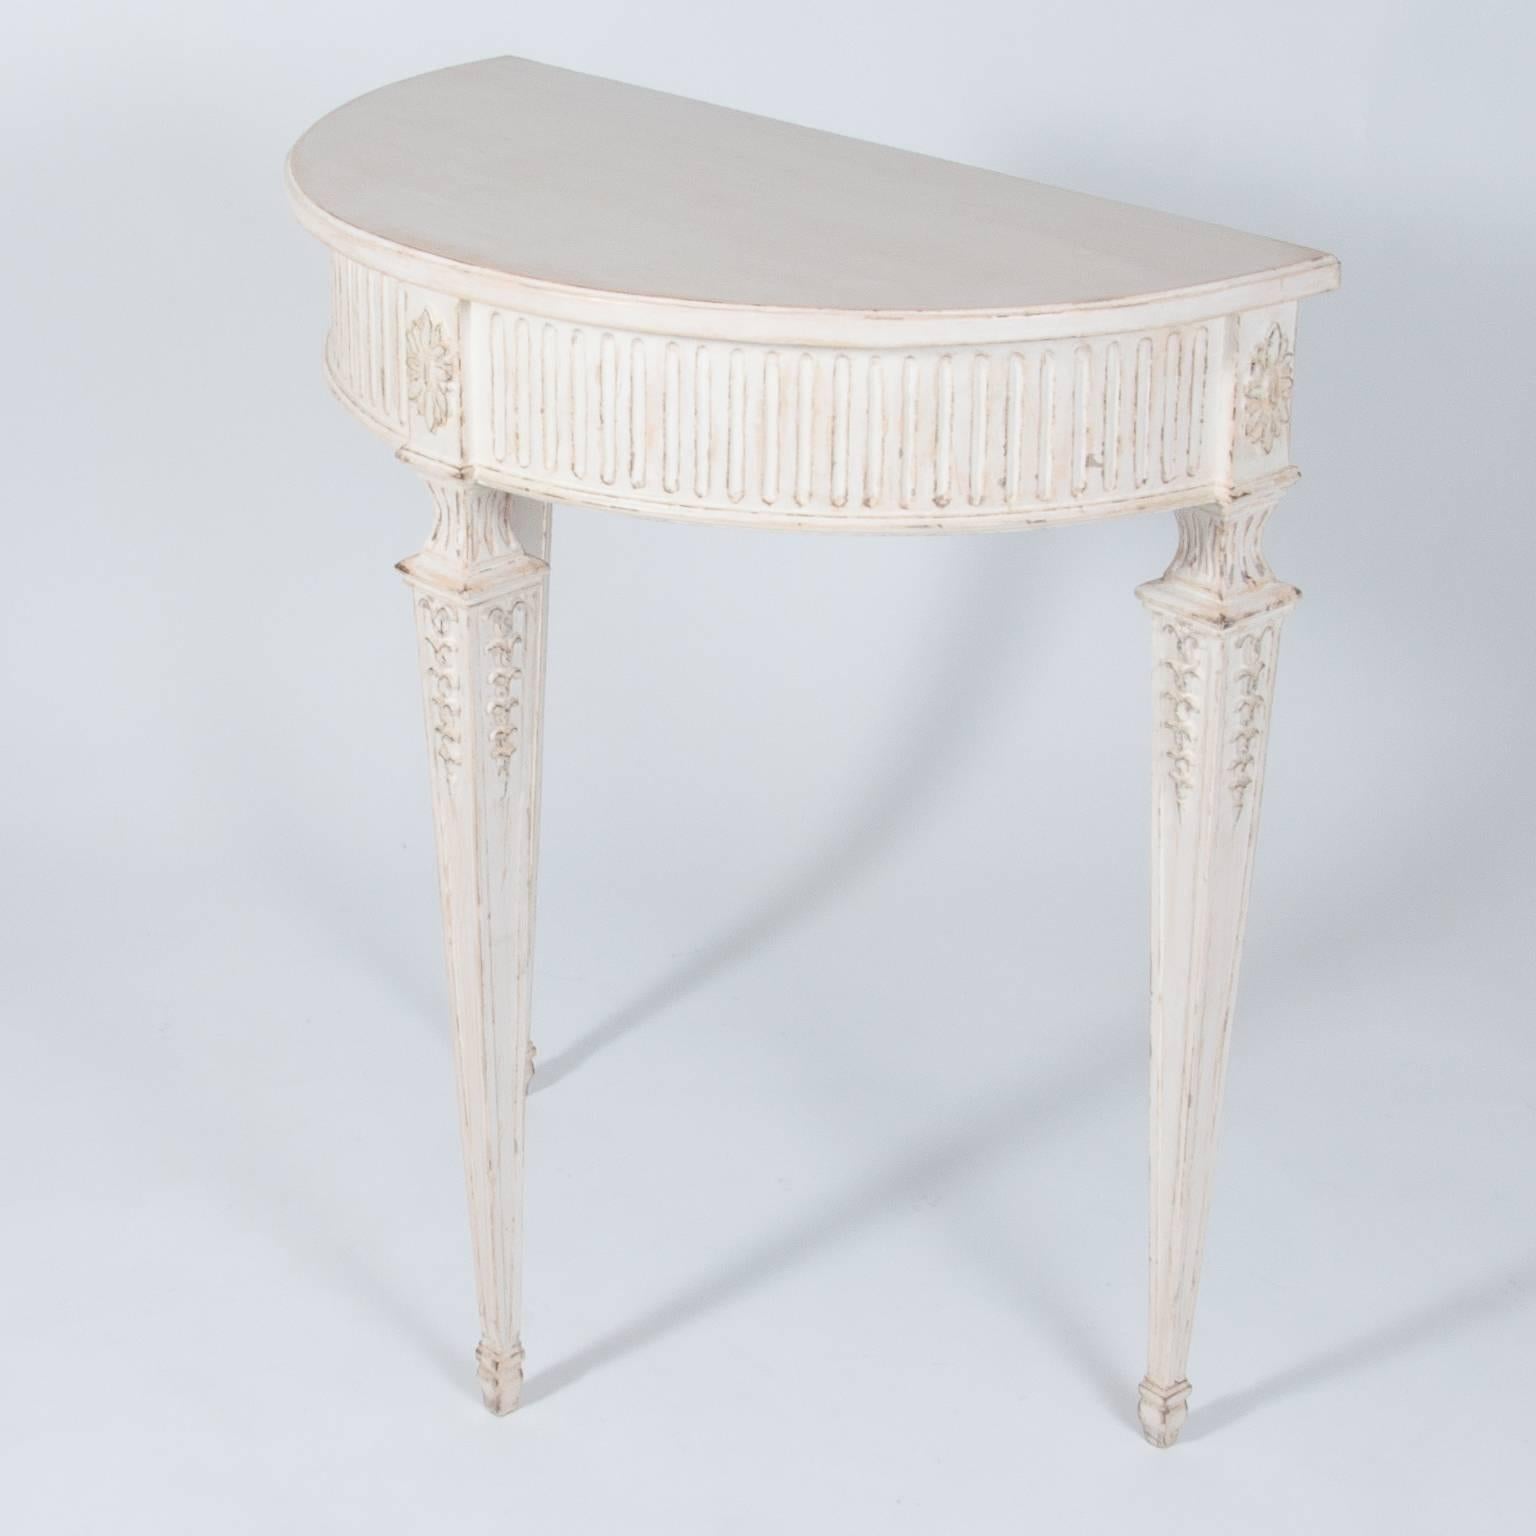 A very nice smallSwedish Gustavian Style demilune console from the 20th century. The table features carved rosettes with lamb's tongue carving on the apron; raised on square, tapered and fluted legs. The aprons are decorated with applied floral